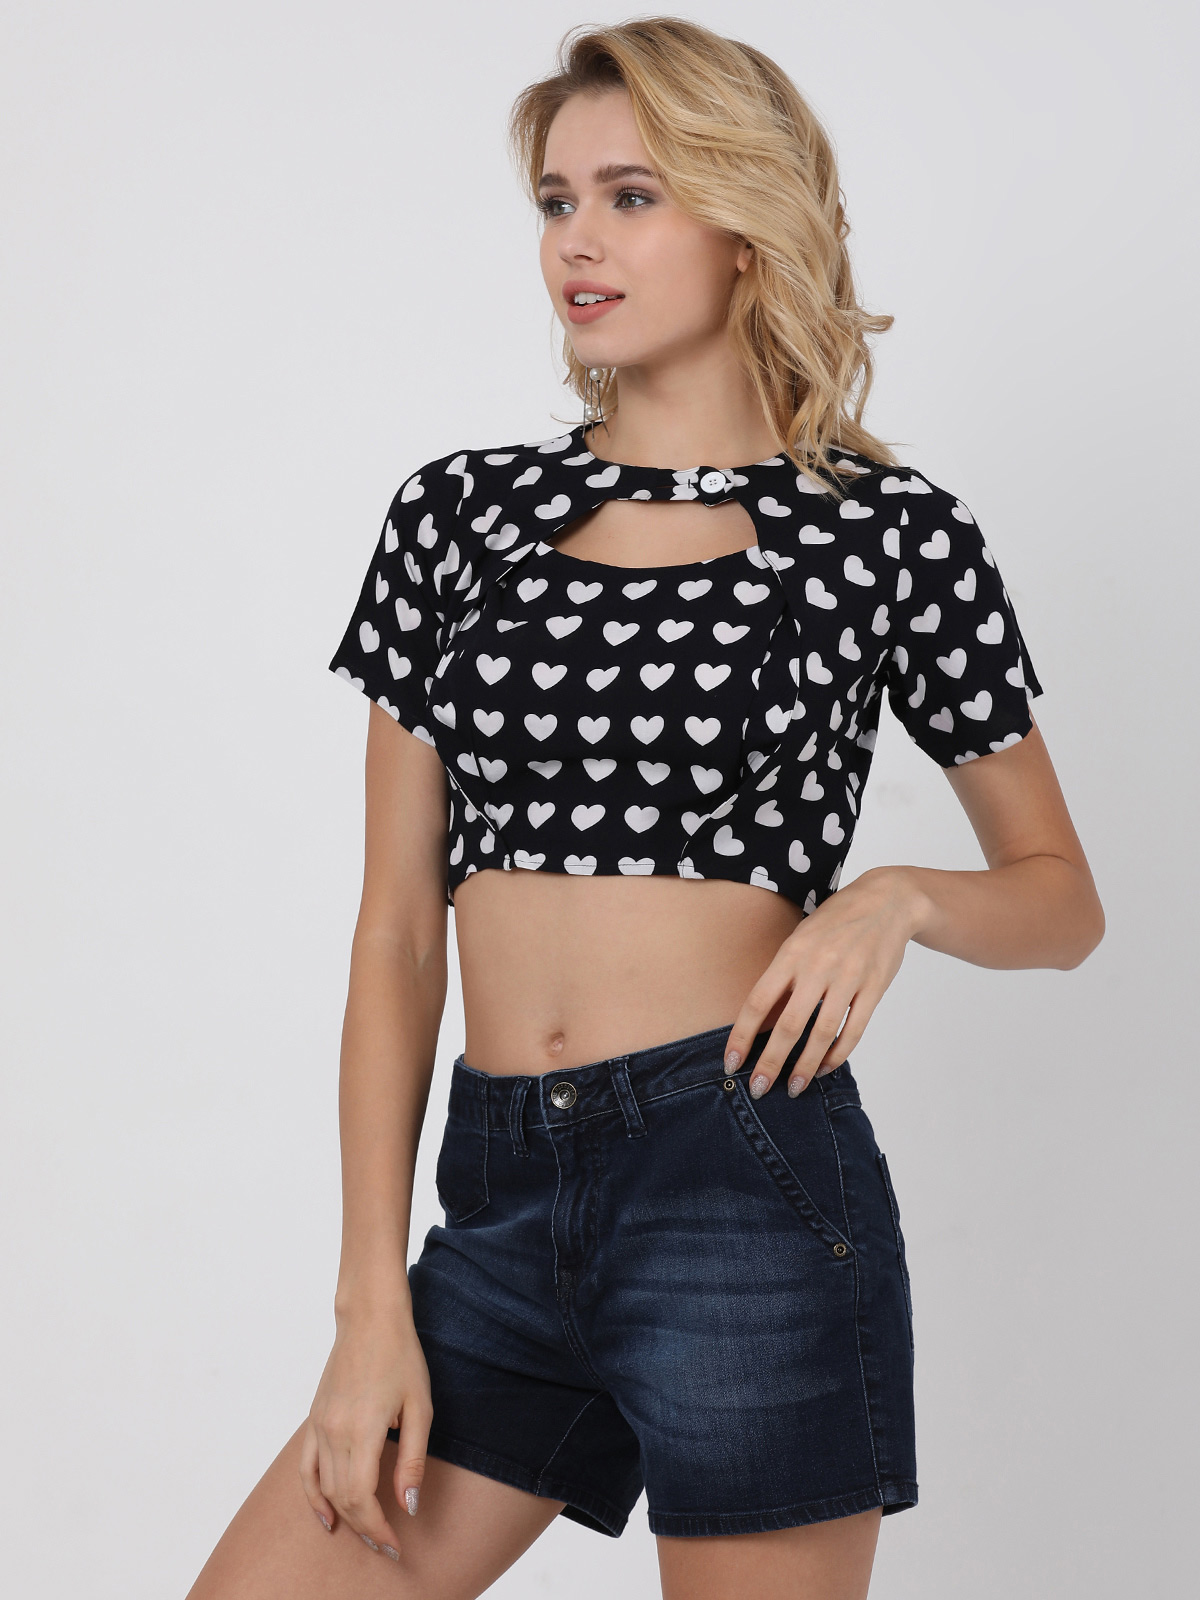 Lovely  Heart Printed Crop Top